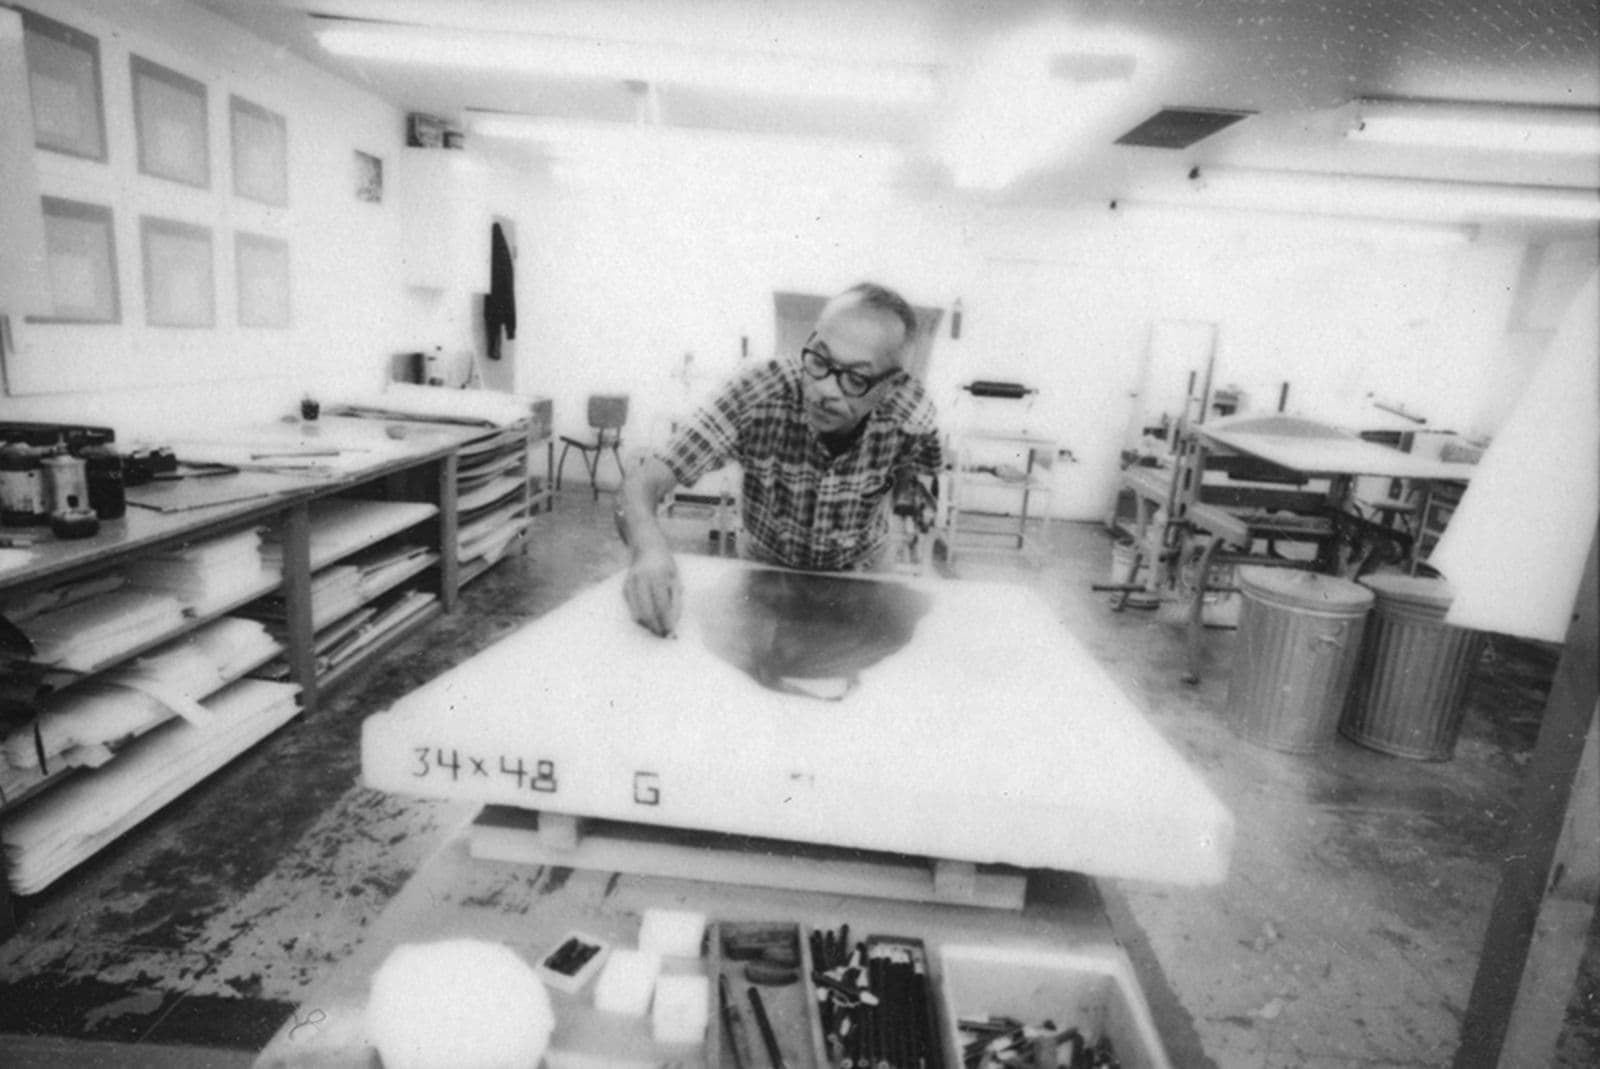 Image from a contact sheet in the Kenneth Tyler Collection archive showing Charles White working at Gemini Limited